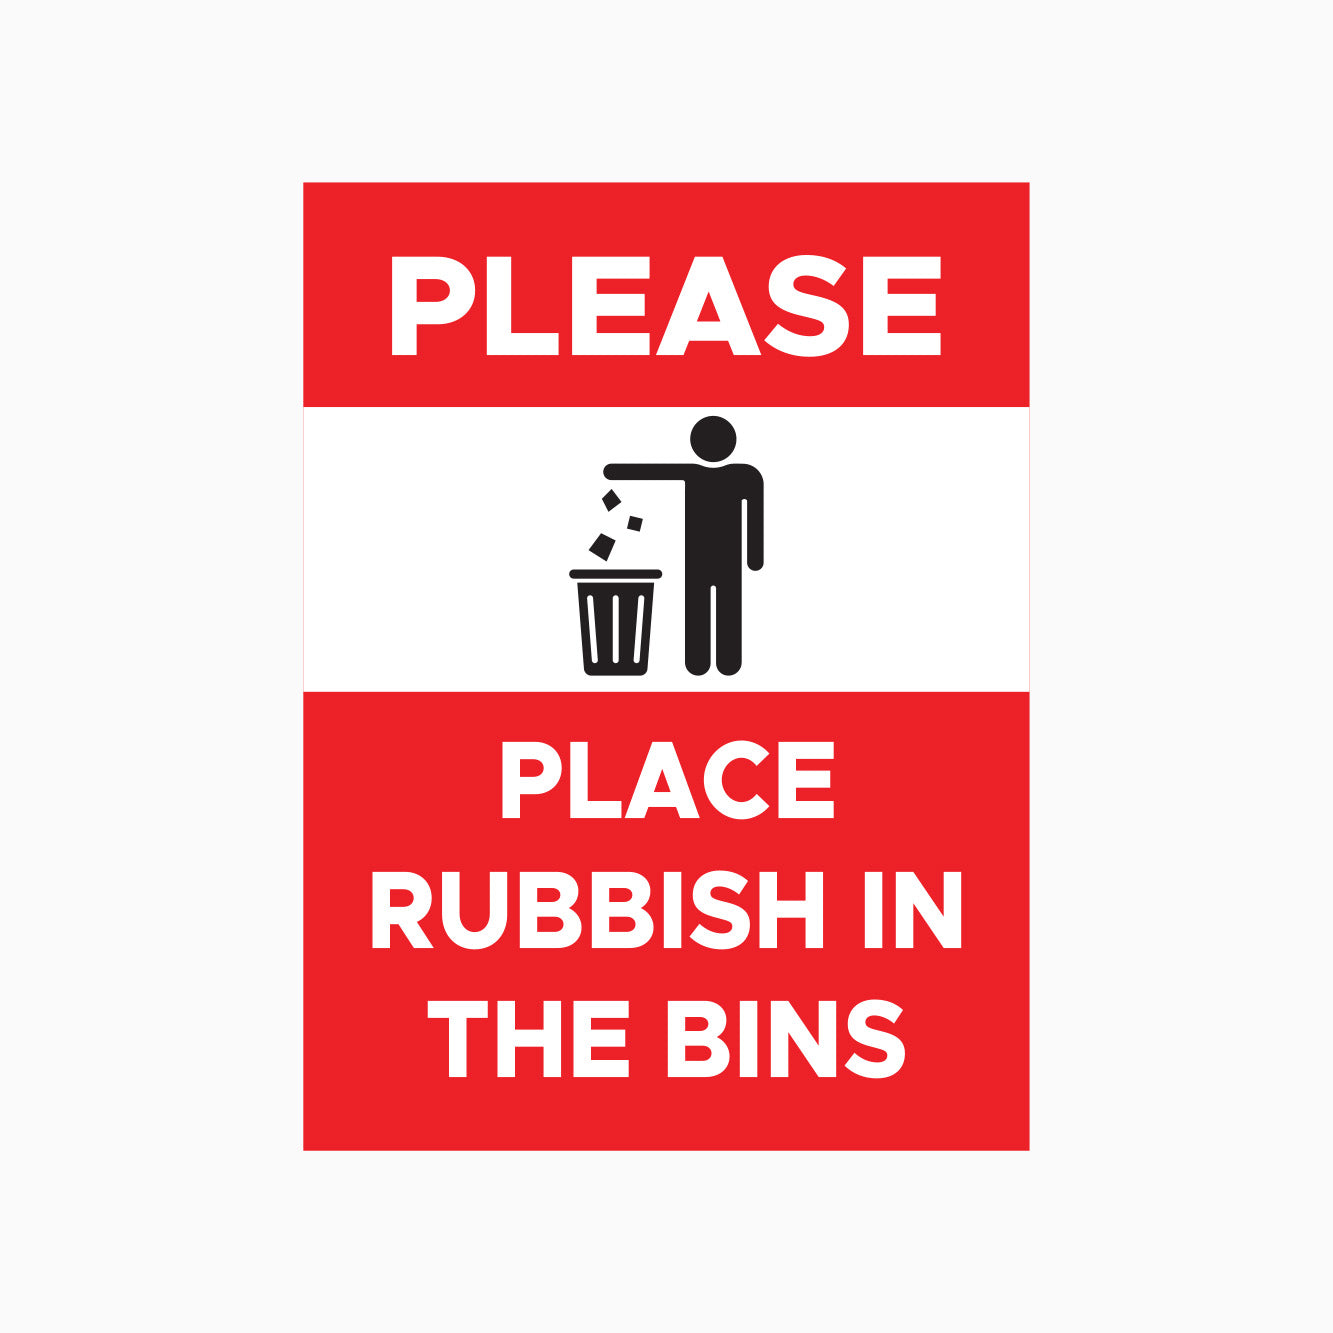 PLEASE PLACE RUBBISH IN THE BINS SIGN - Please Put Rubbish In Bins Sign